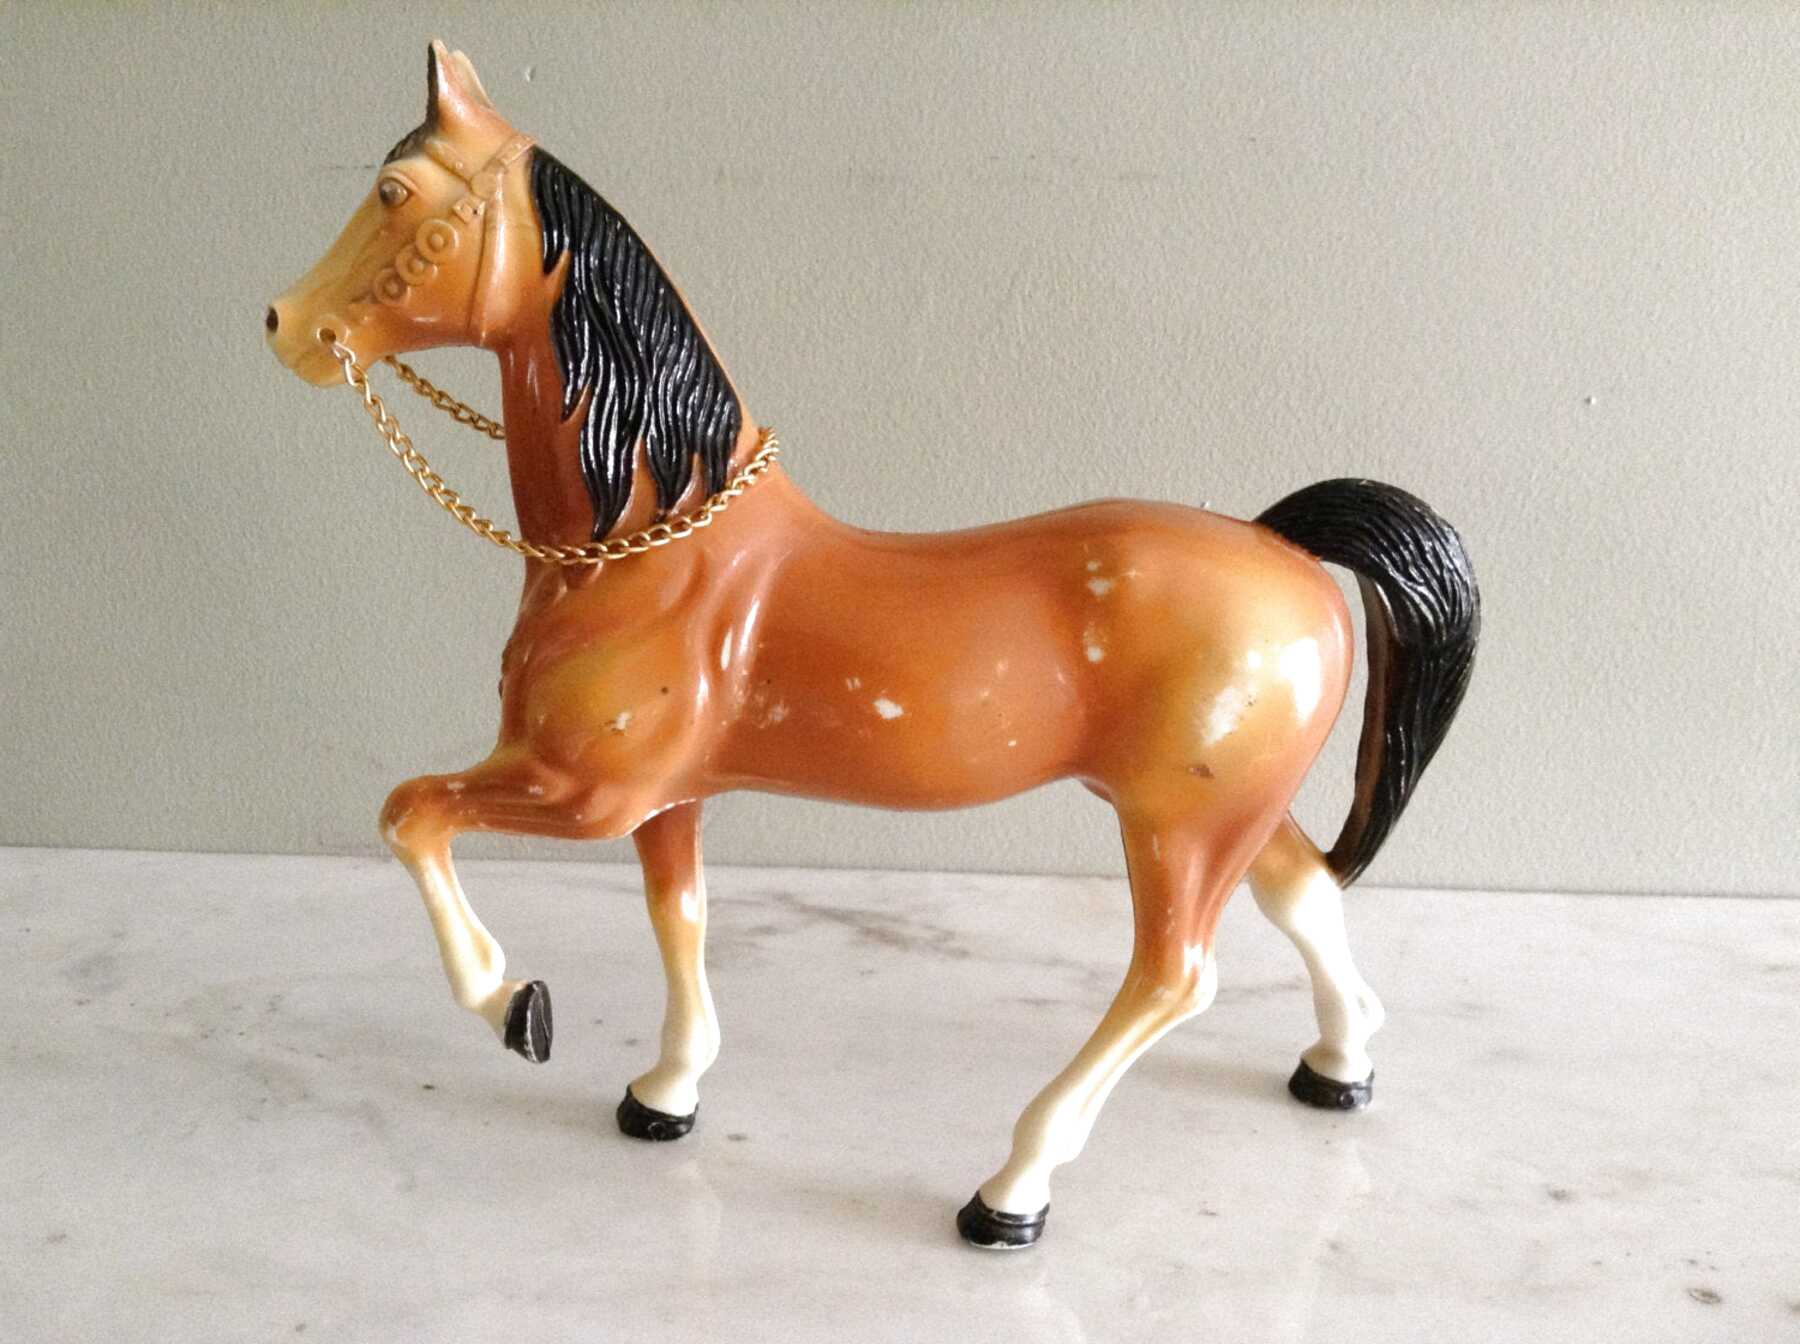 Plastic Toy Horses for sale in UK View 62 bargains